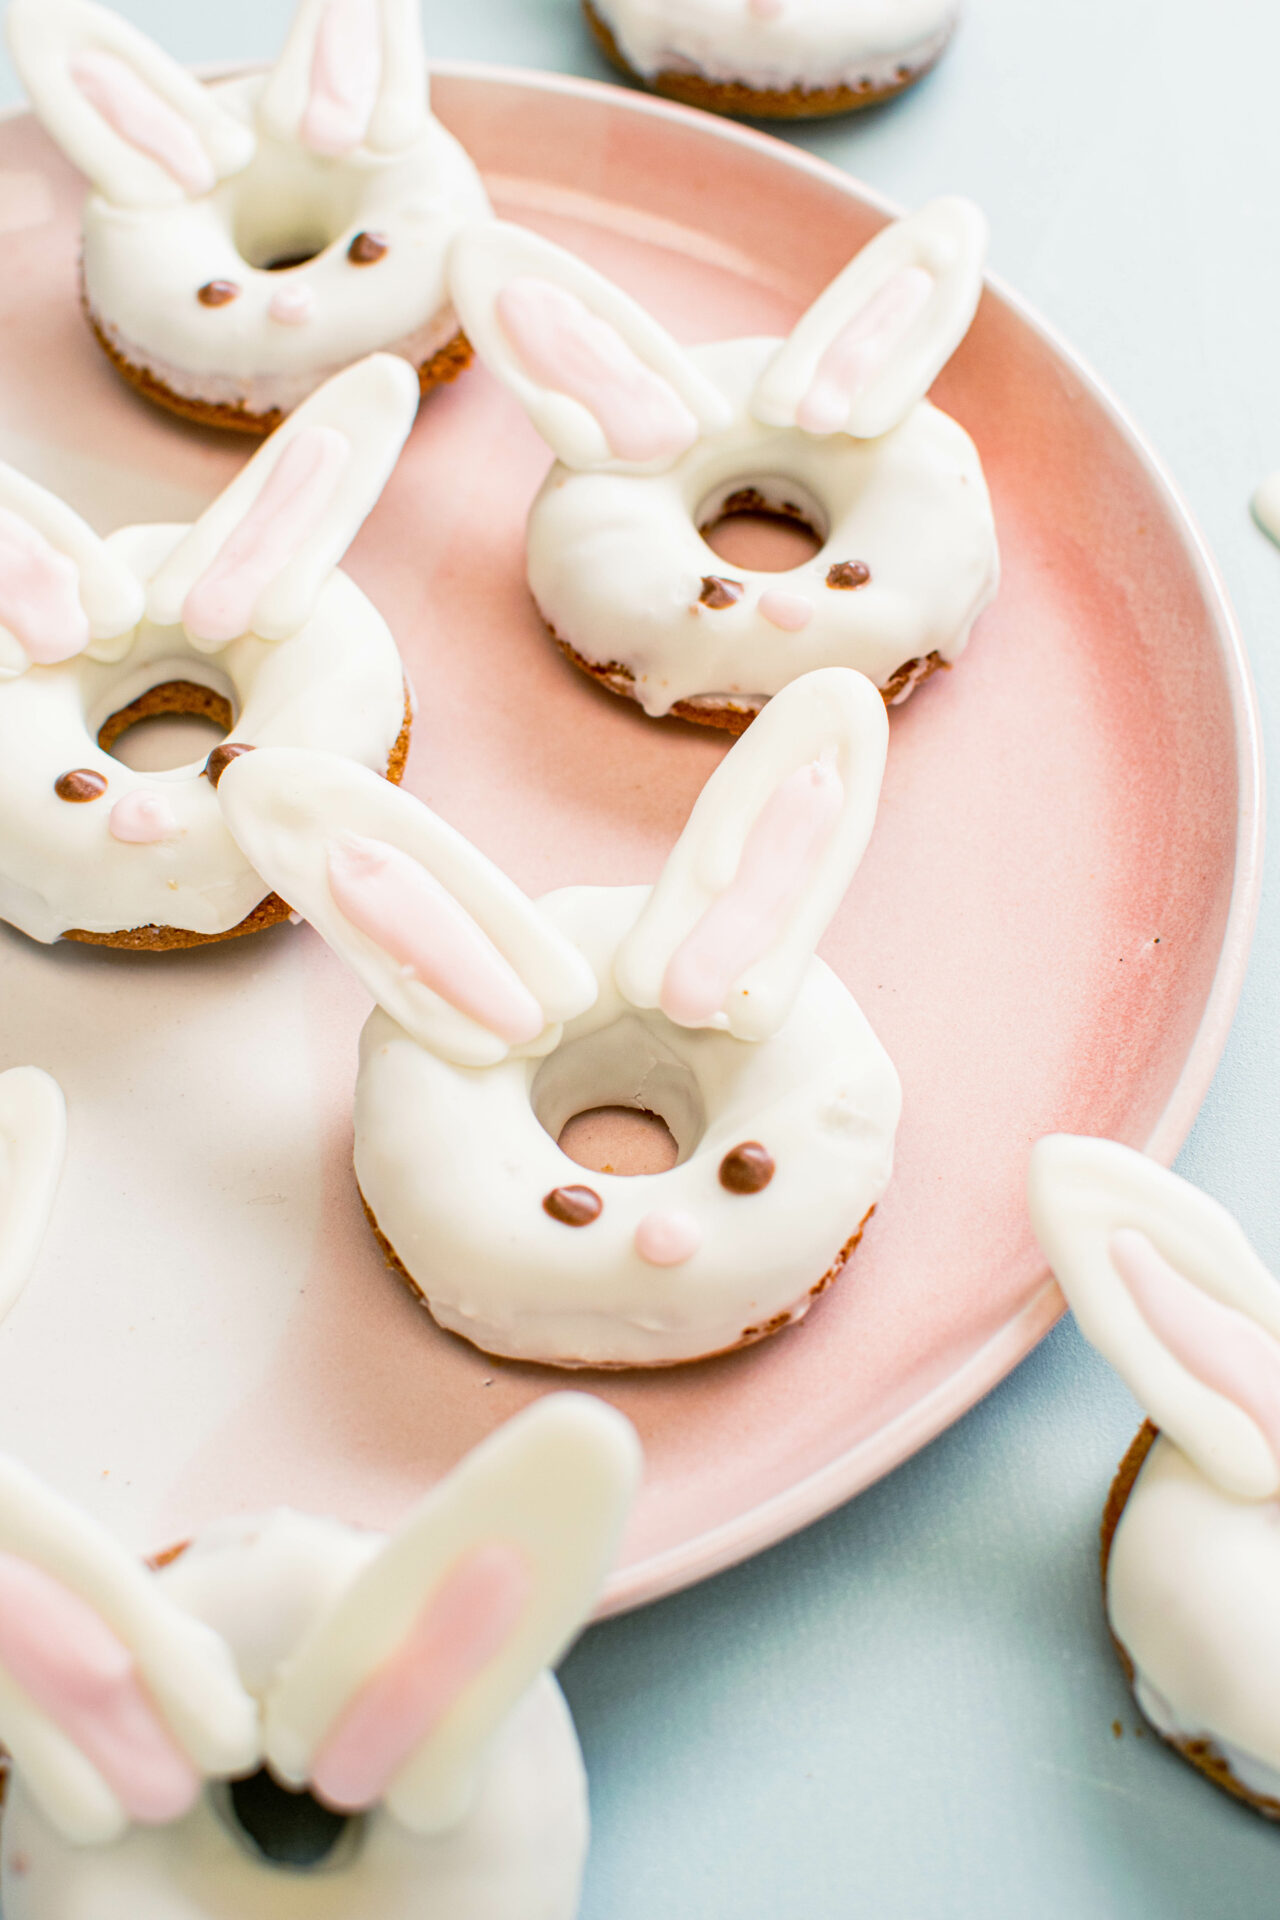 EASTER DONUT WITH BUNNY EARS